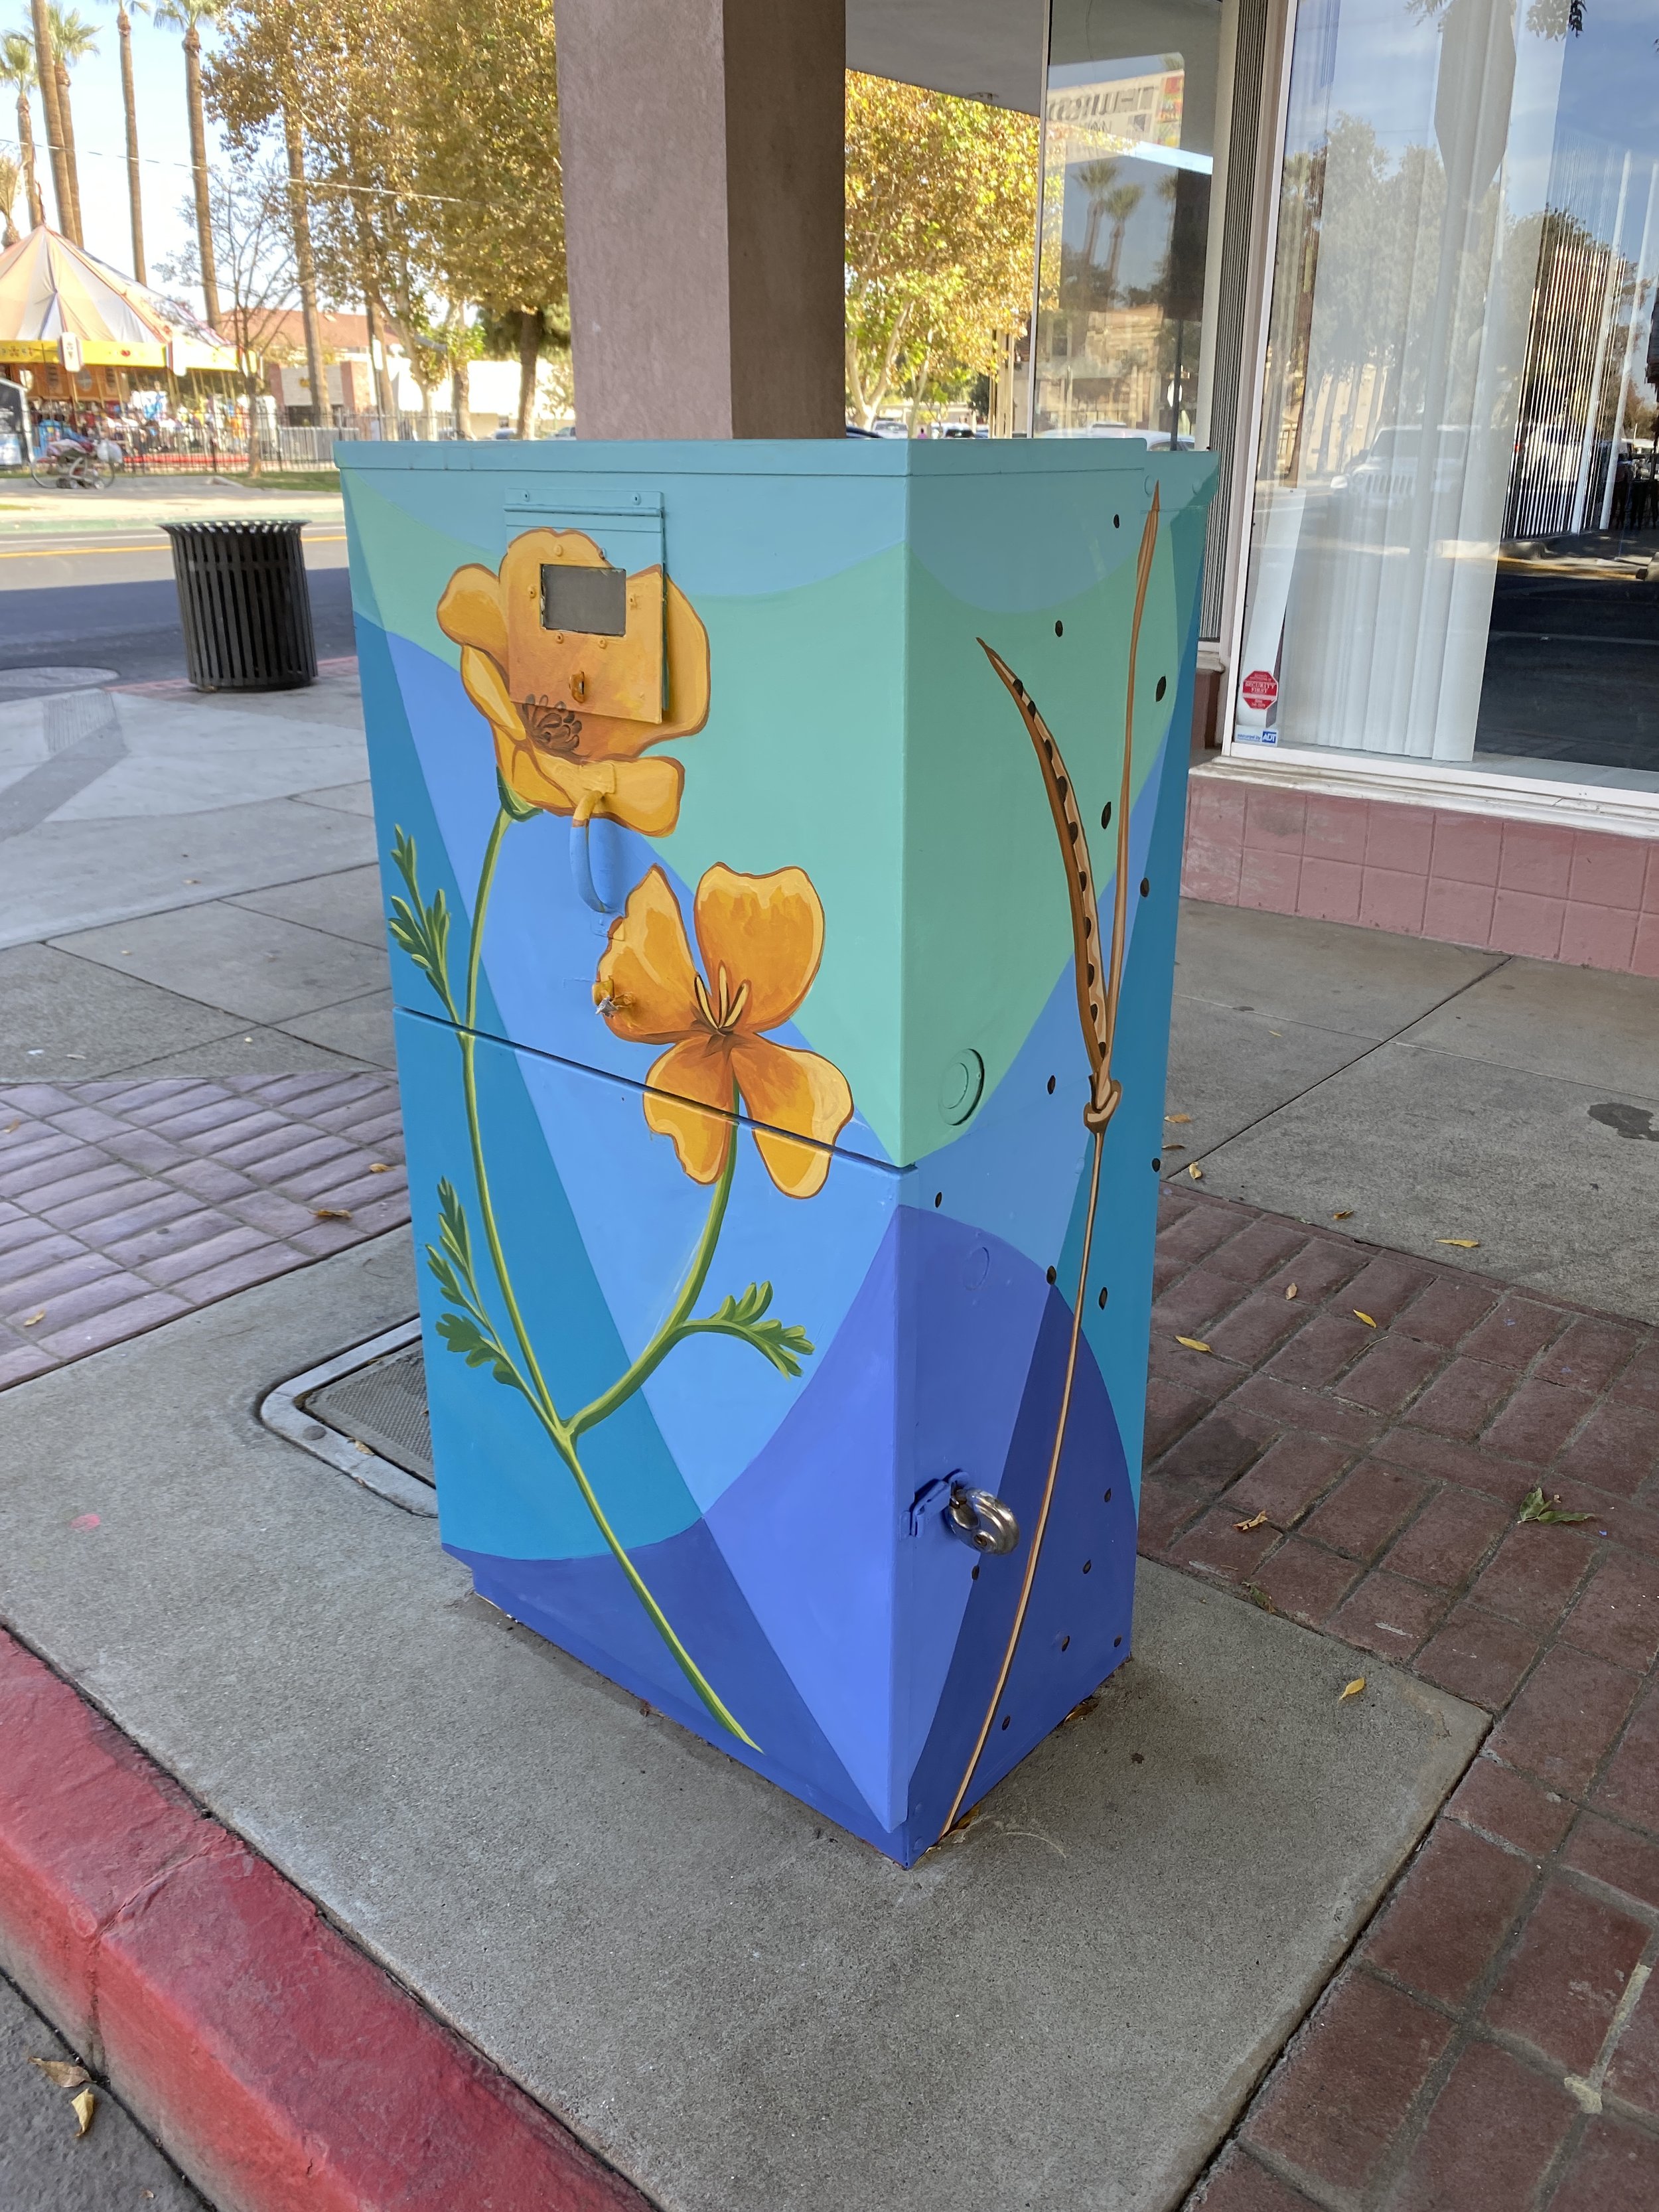 California Poppy Lifecycle electrical box in downtown Hanford, CA. 2022.